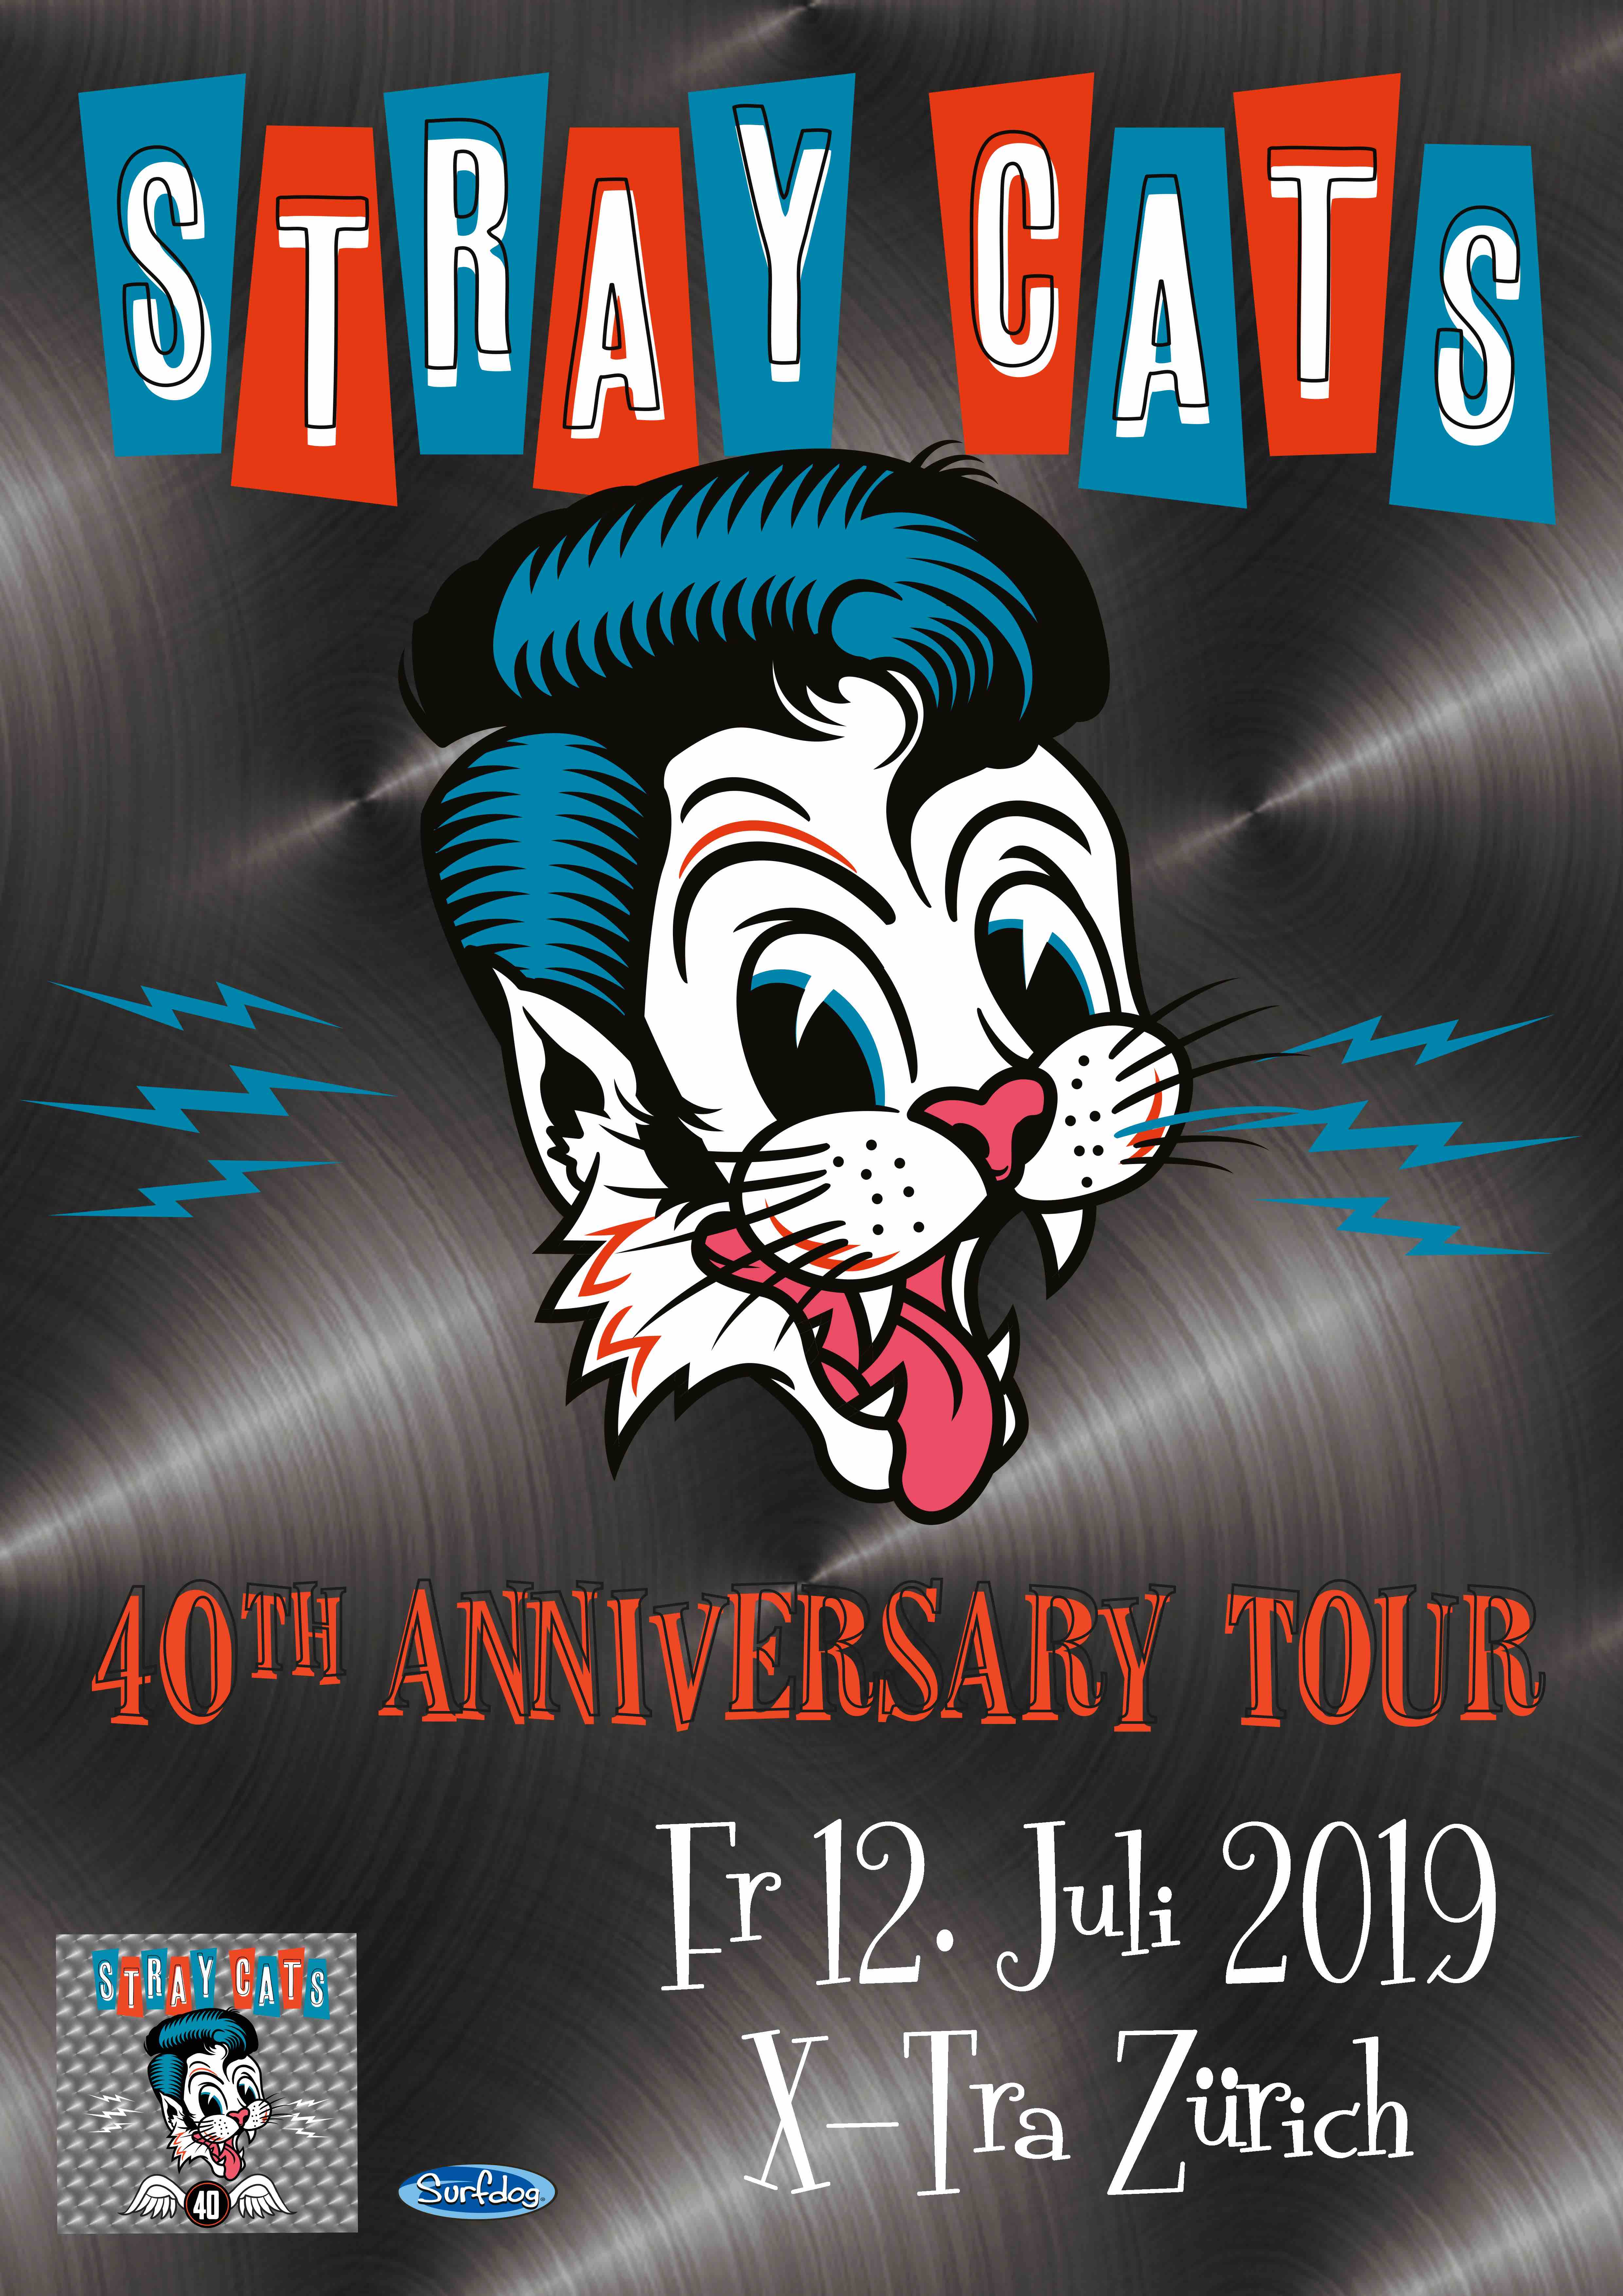 Stray Cats added a new date to their 40th Anniversary Tour! Stray Cats